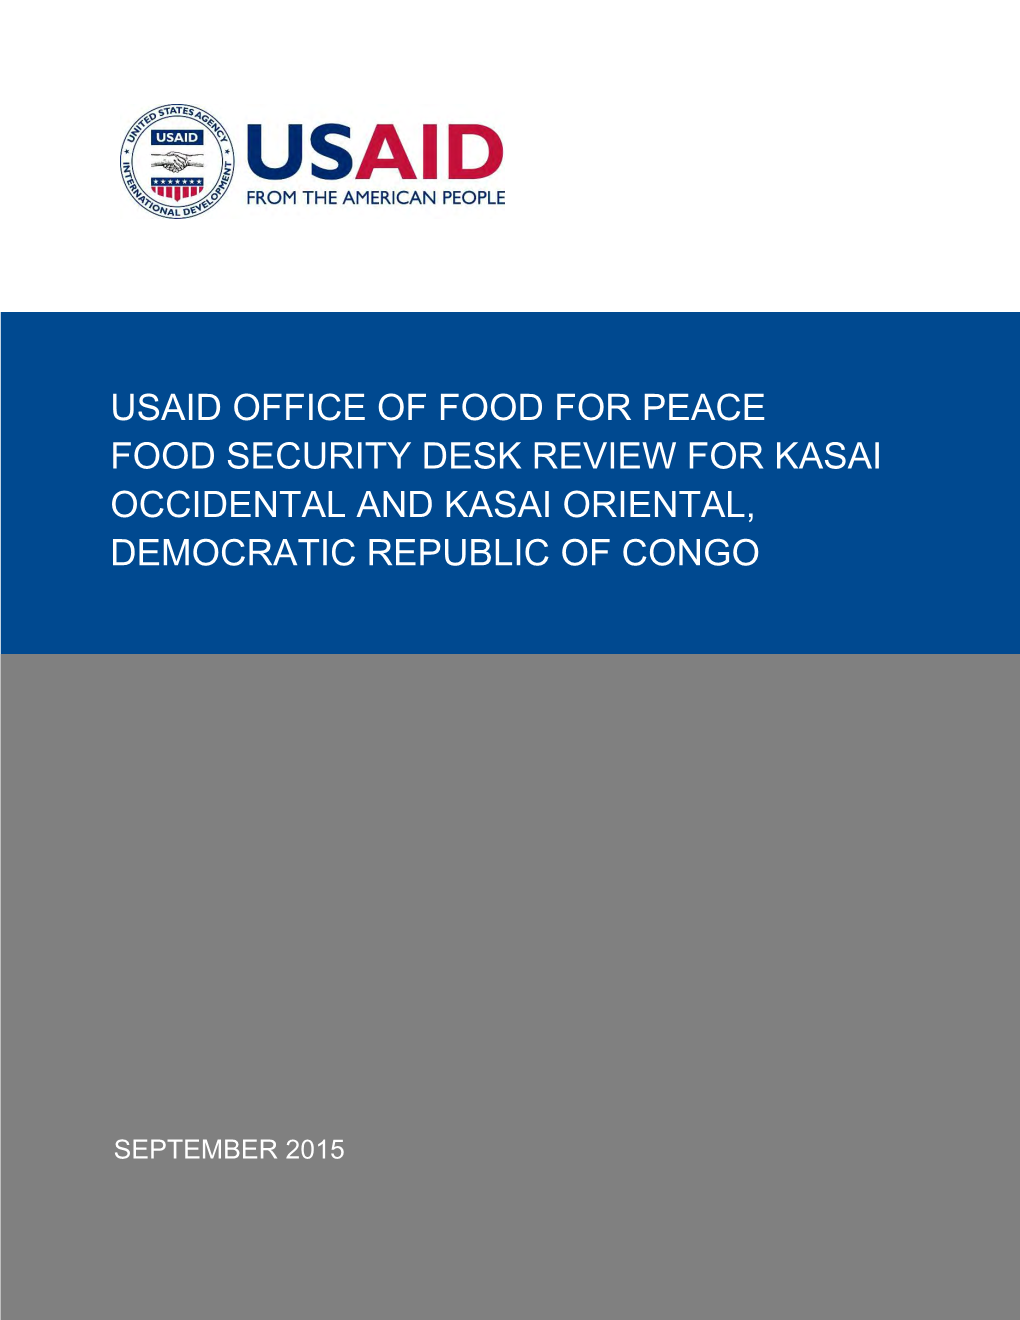 Usaid Office of Food for Peace Food Security Desk Review for Kasai Occidental and Kasai Oriental, Democratic Republic of Congo